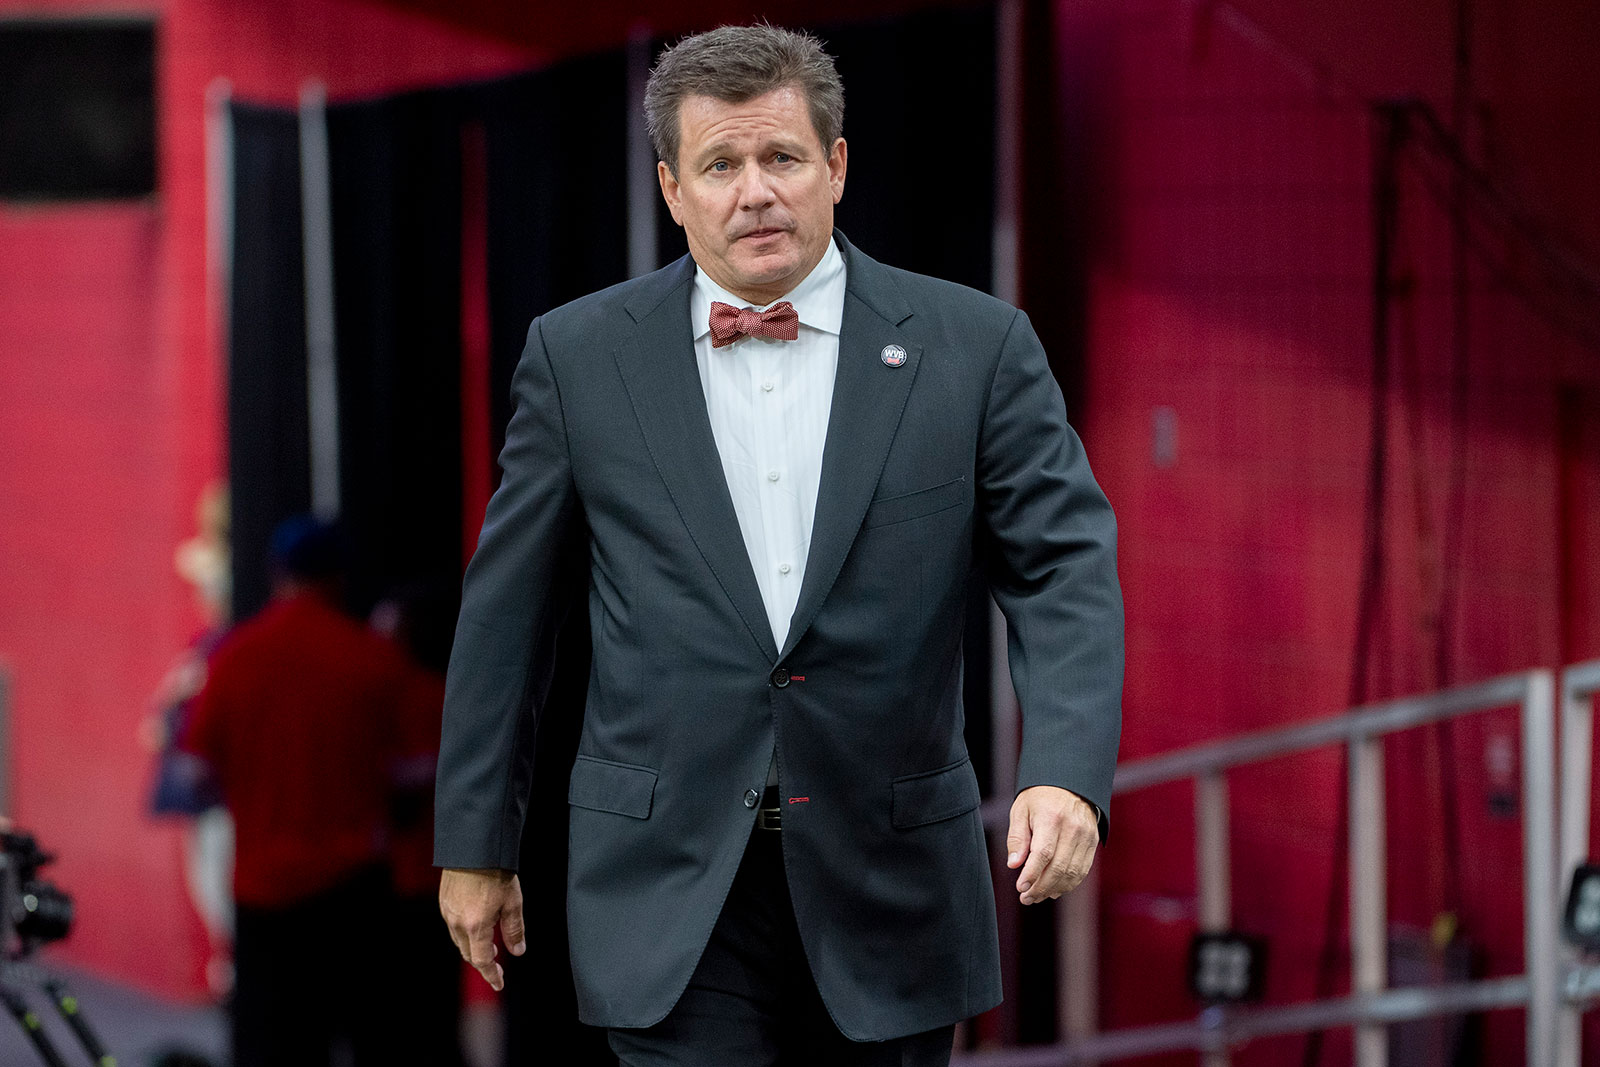 Arizona Cardinals owner Michael Bidwell walks onto the field prior to an NFL game between the Atlanta Falcons and Arizona Cardinals in 2019.